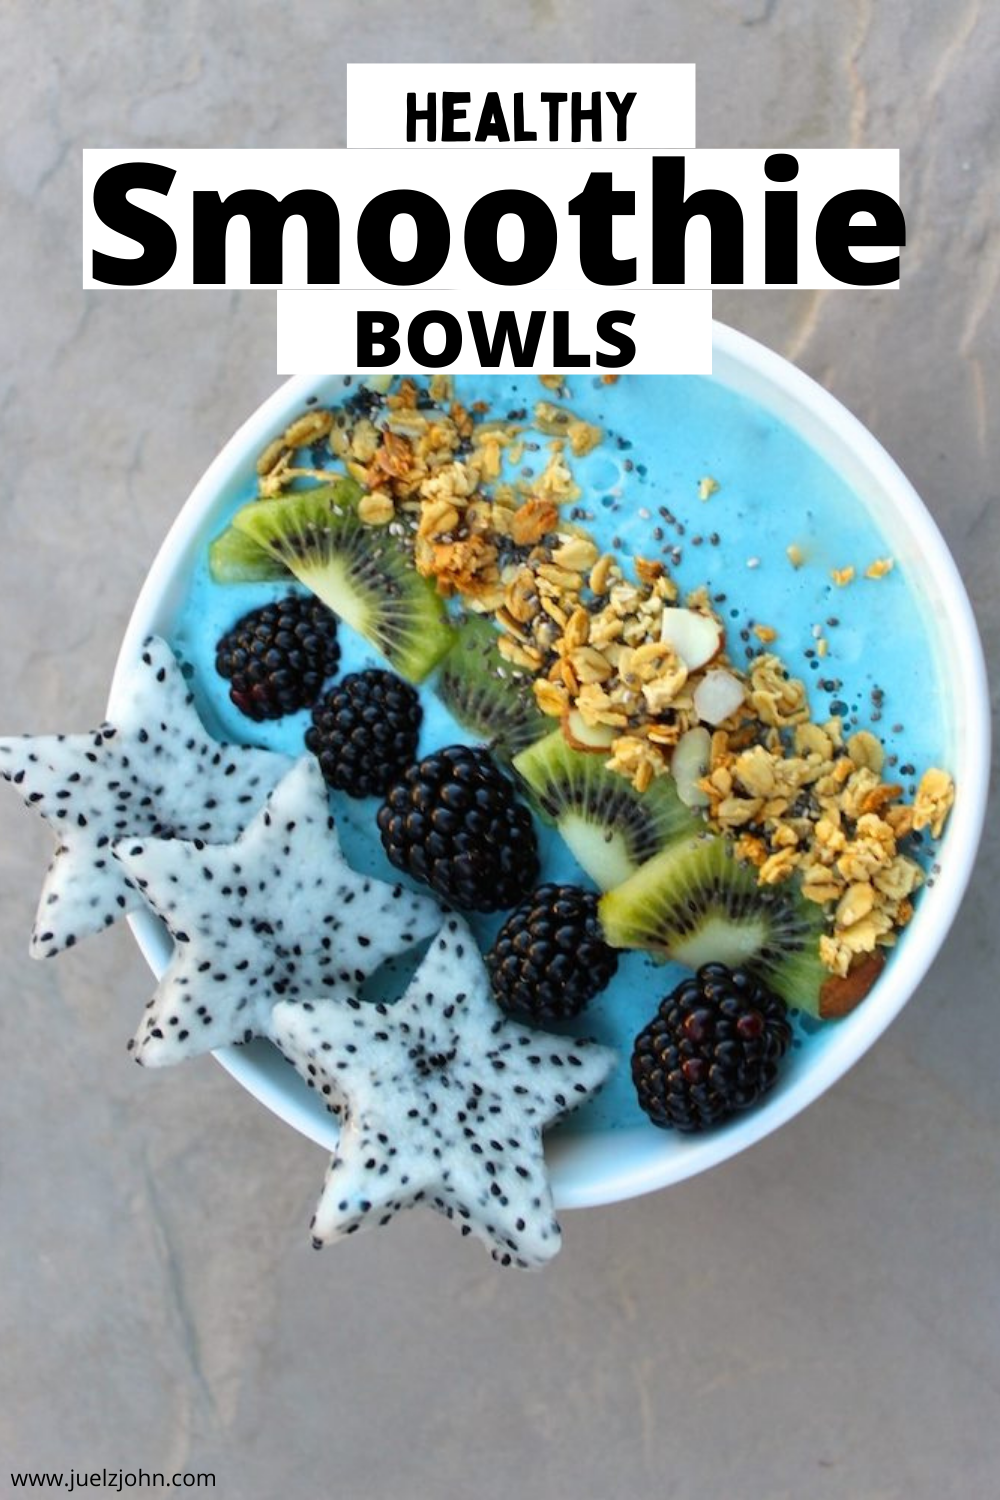 https://juelzjohn.com/wp-content/uploads/2021/05/Smoothie-bowl-recipes-17.png